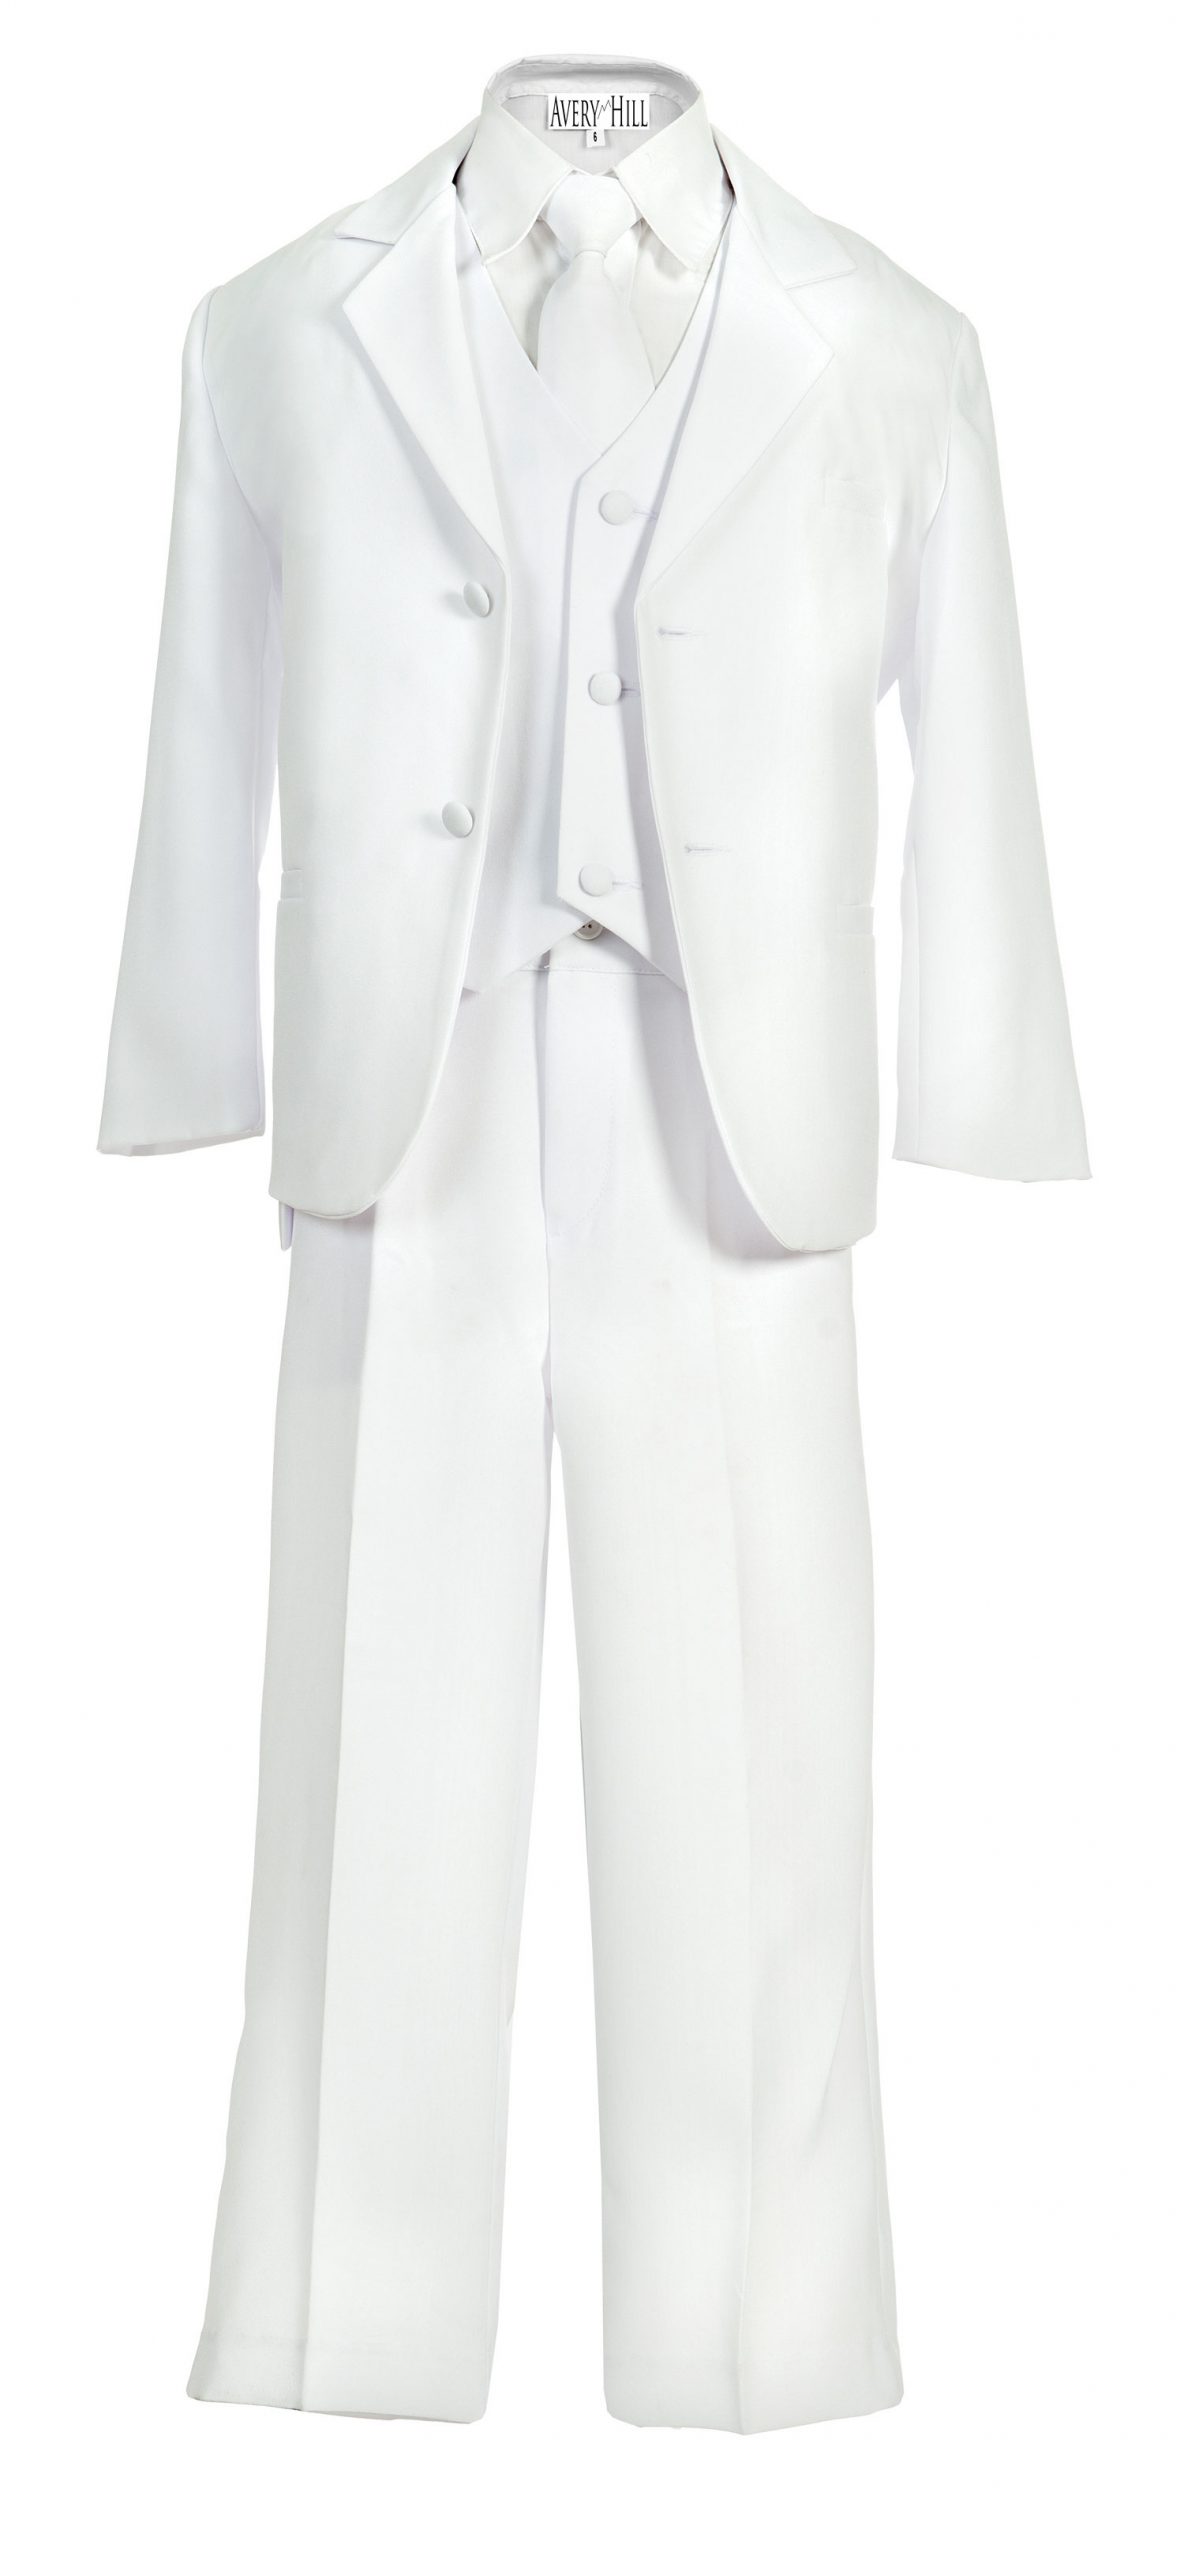 Avery Hill Boys Formal 5 Piece Suit with Shirt and Vest White - 16